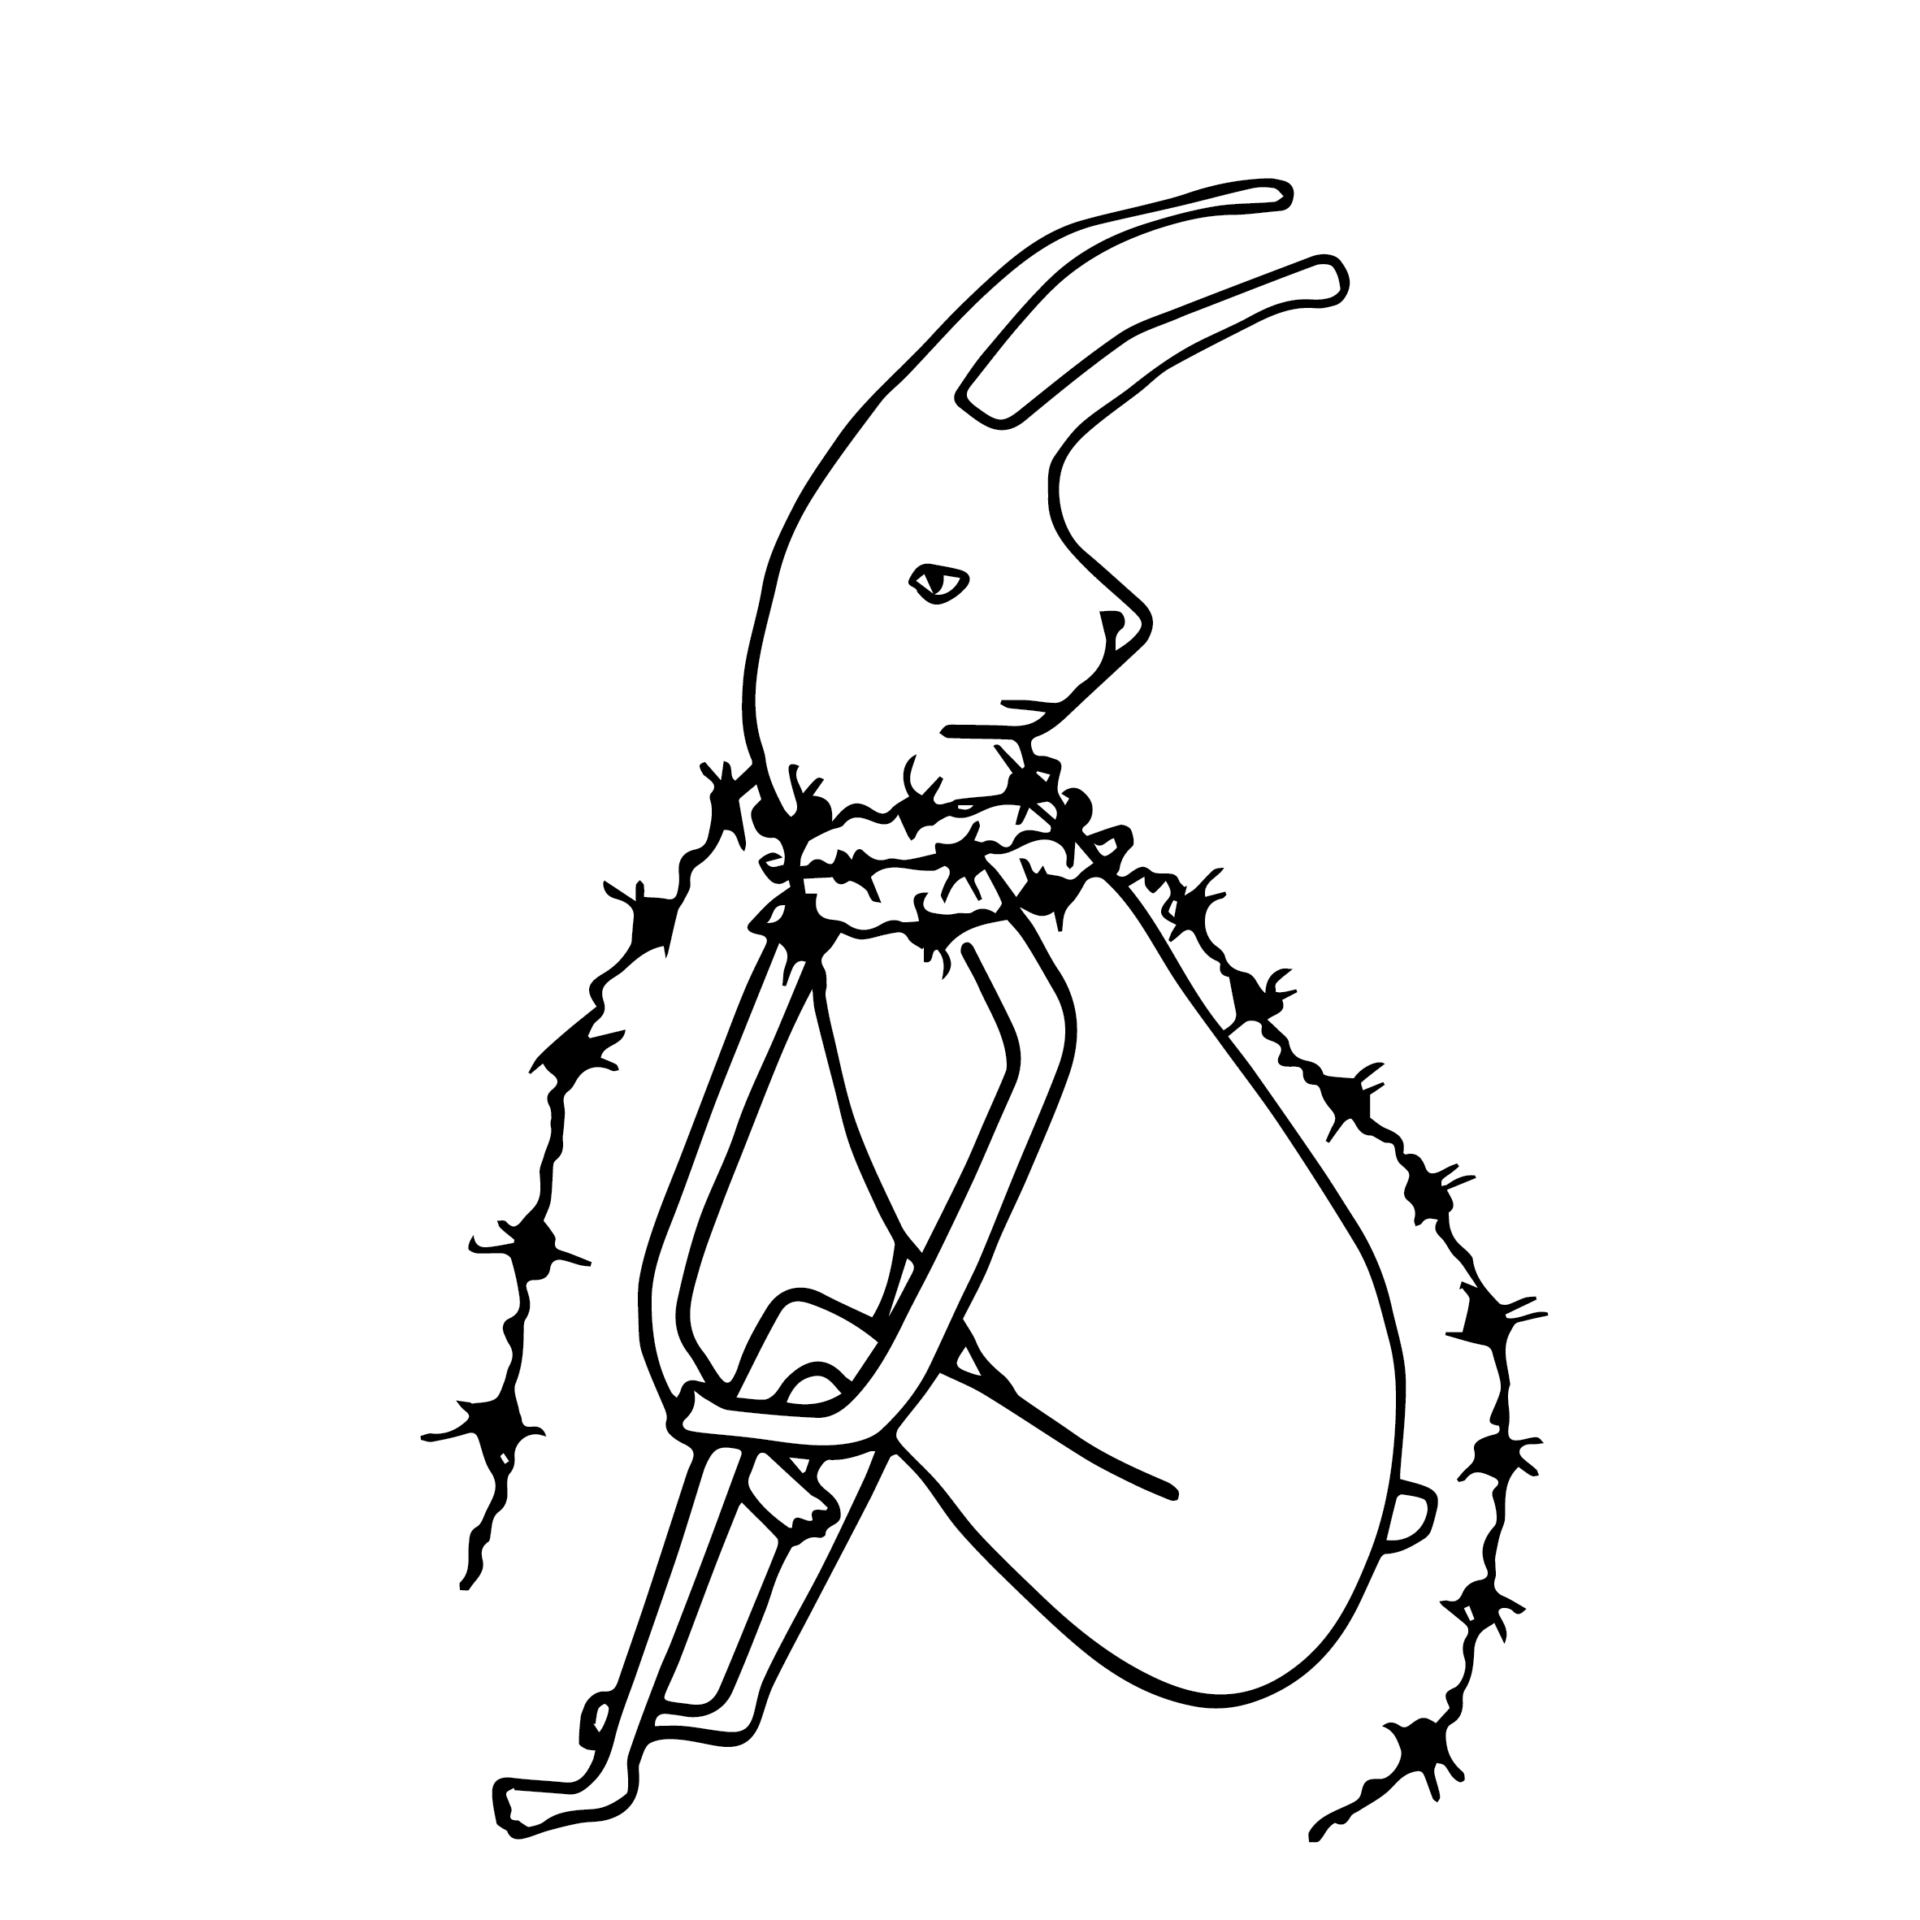 drawing of rabbit sitting very still with a line of barbed wire wrapped around throat as a scarf